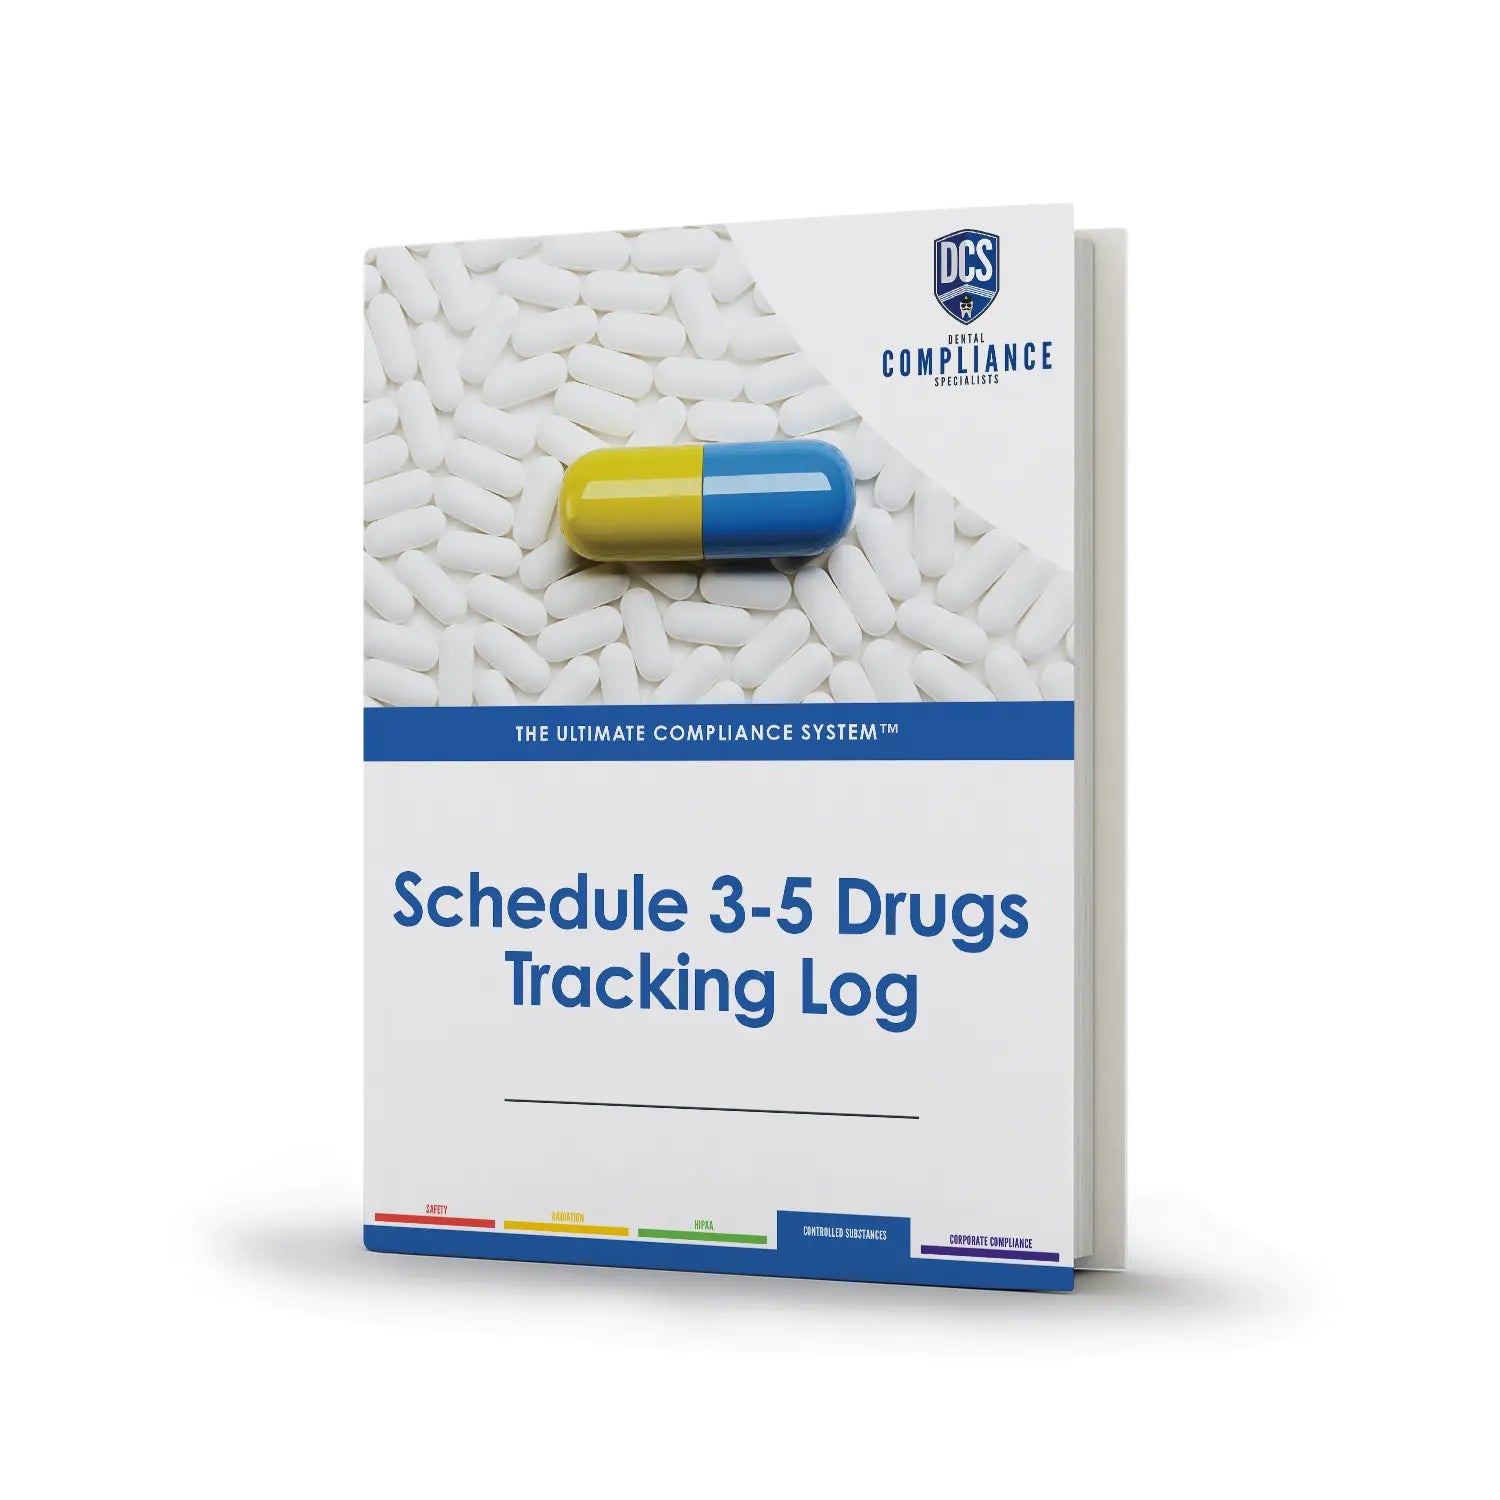 DEA Controlled Substance Drug Tracking Log - Schedules 3, 4, & 5